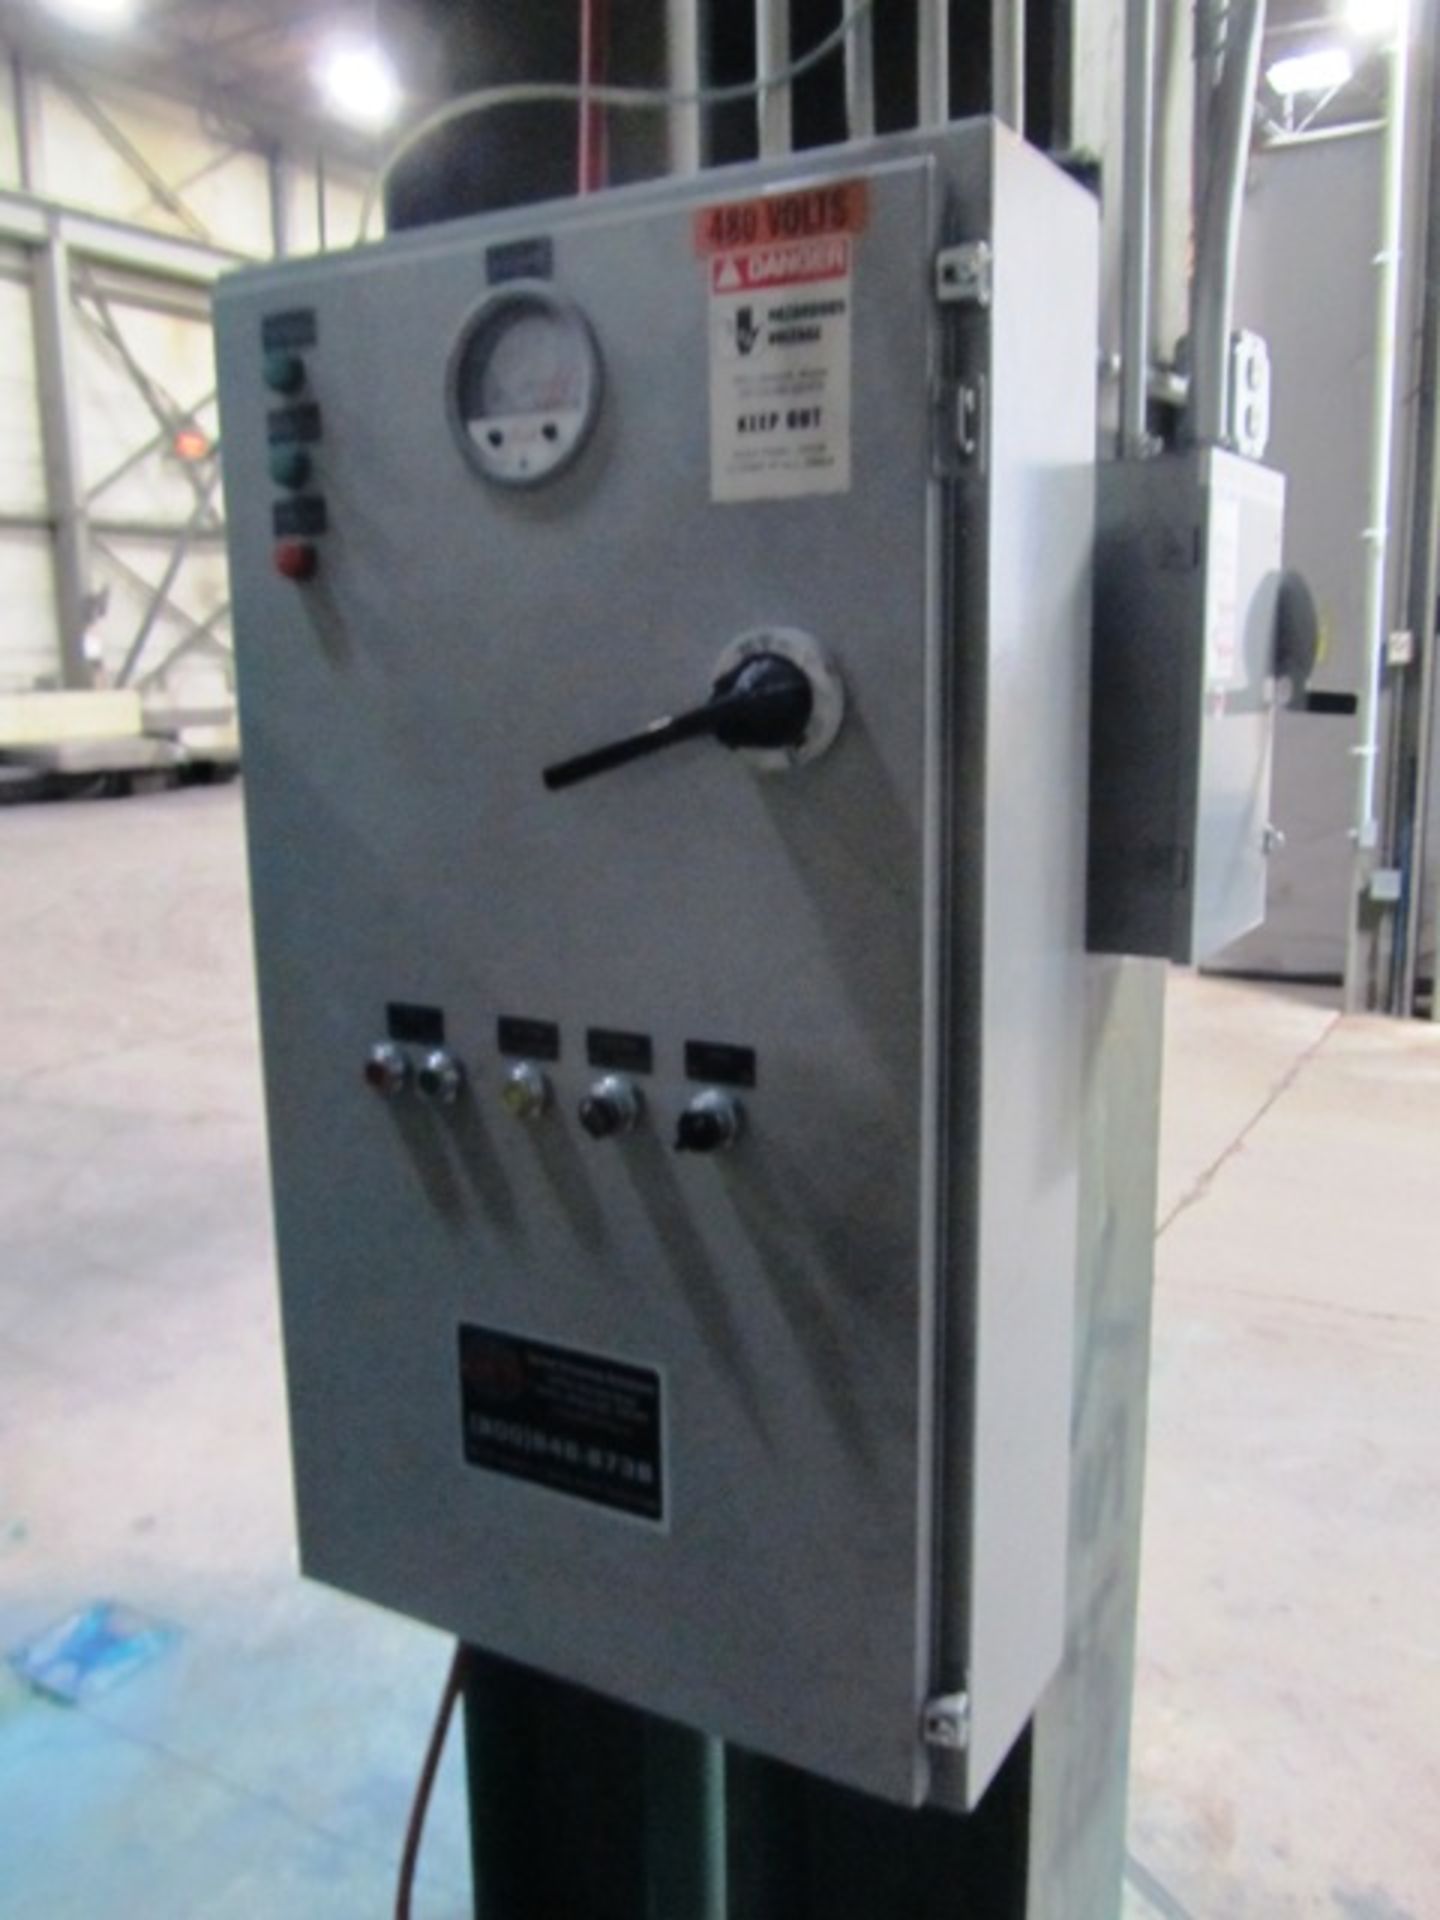 Global 14'D x 12'W x 8'H 2-Door Finishing Blast Booth with Lights, Start & Stop Push Button Control - Image 2 of 2